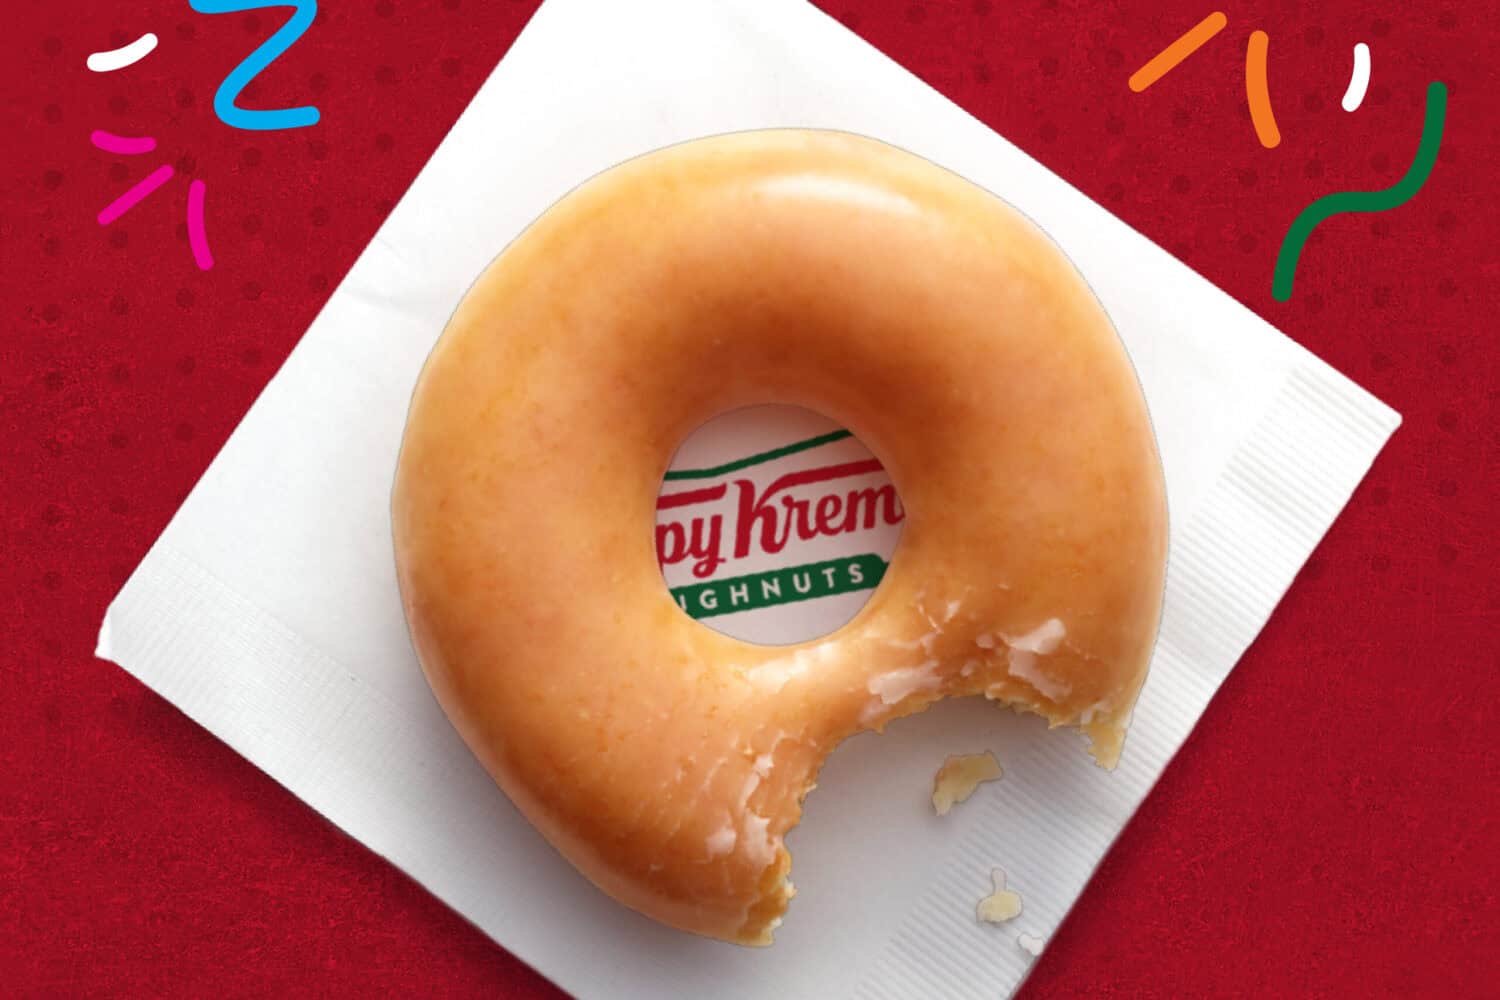 Today! Krispy Kreme Gives Away Free Doughnuts on Random Acts of